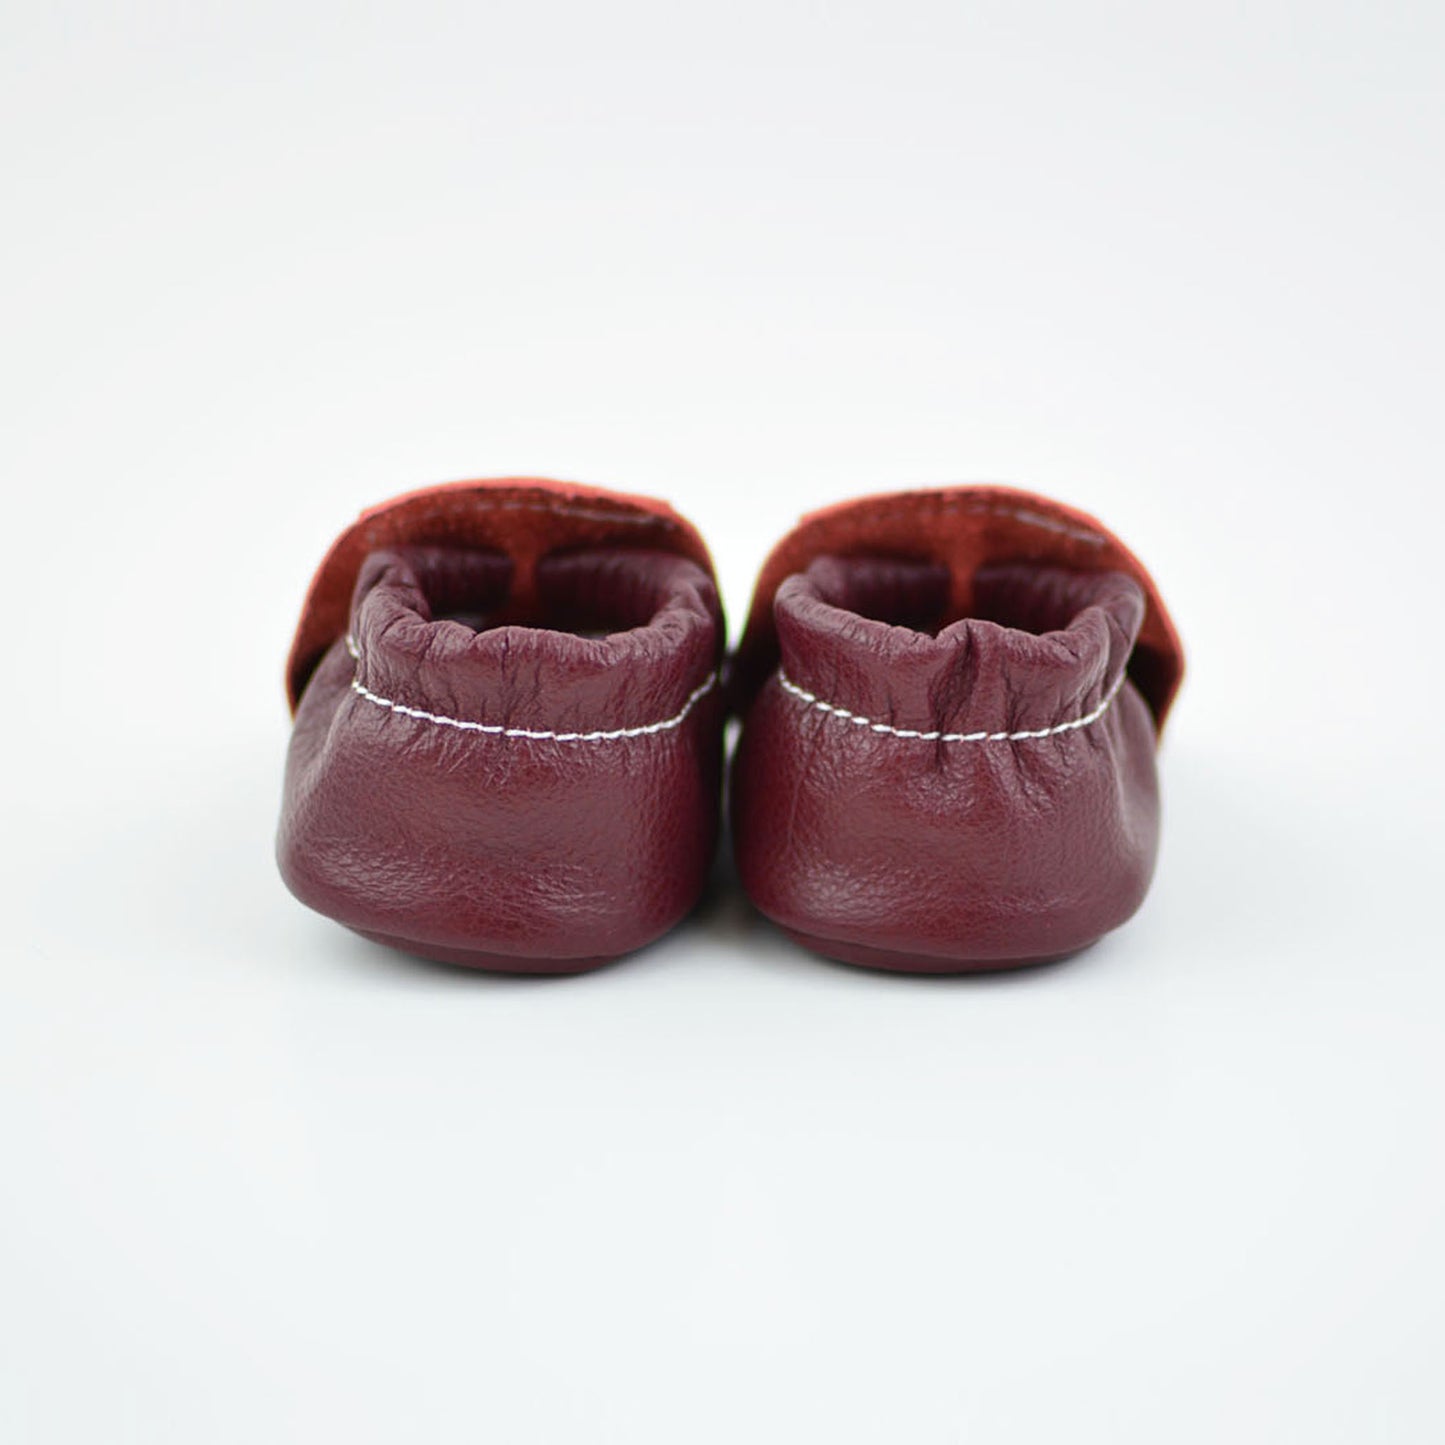 RTS Burgundy Lokicks With Same Leather Soles - Size 3 (12-18M)(5")